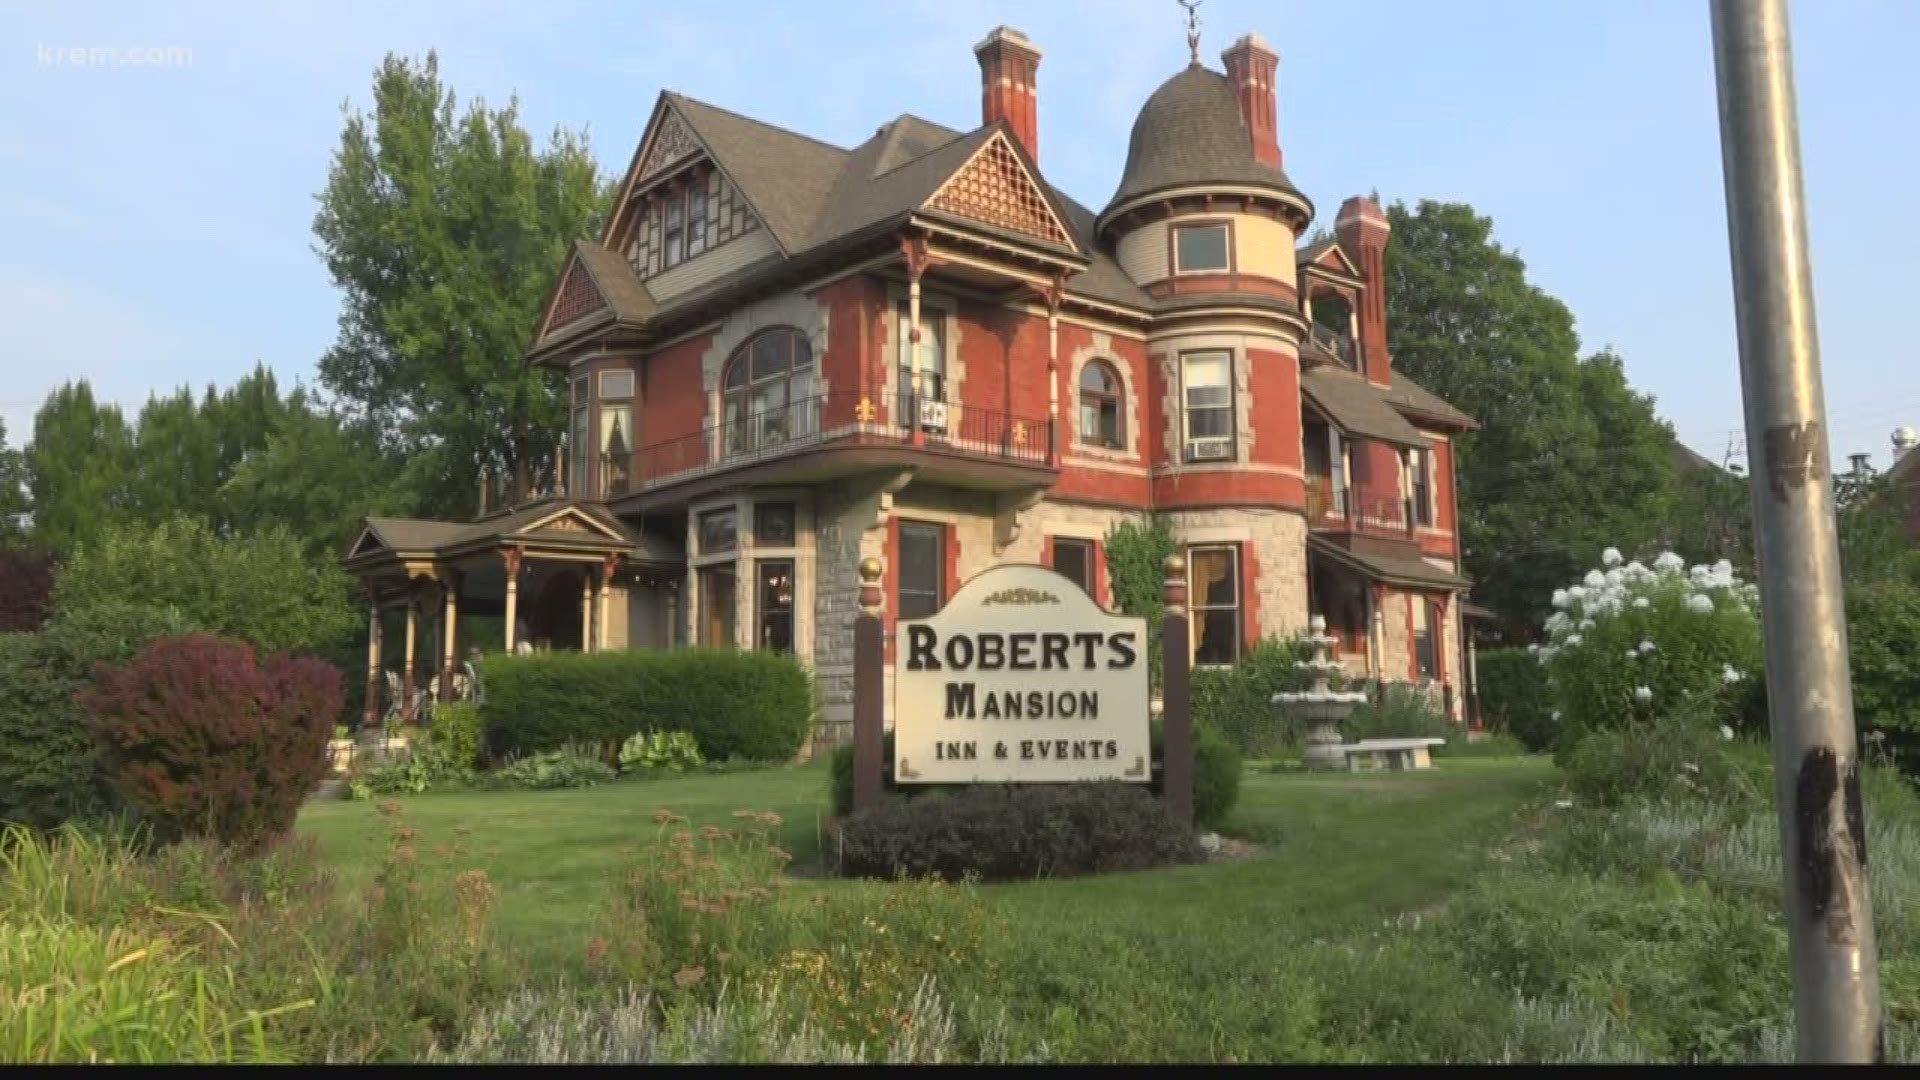 New owner transforms Roberts Mansion in Browne's Addition (8-6-18)